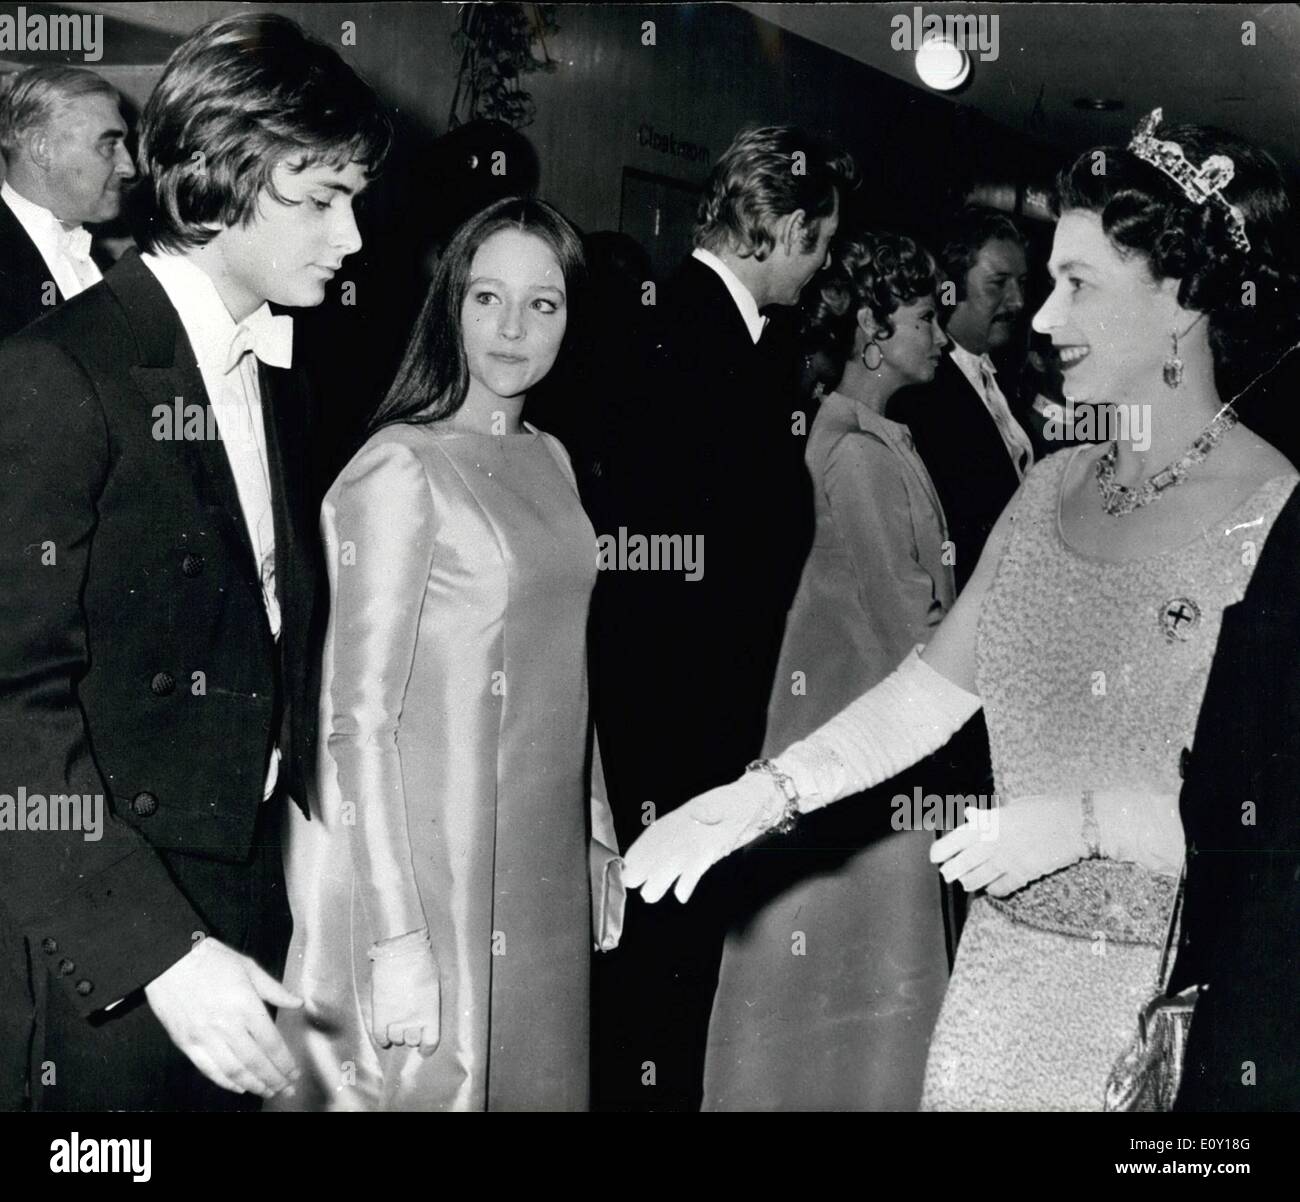 Mar. 03, 1968 - QUEEN MEETS ROMEO AND JULIET, H.M. THE QUEEN talking with OLIVIA HUSSEY and LEONARD WHITING, young stars of Romeo aad Juliet, prior to the Royal Film Perfornance at the Odeam, Leicester Square, London, last night. Olivia, at 15, is the youagest actress ever to play the role of Juliet professioxally, She is the daughter of at Argeatiae opera singer and ax English mother. Stock Photo